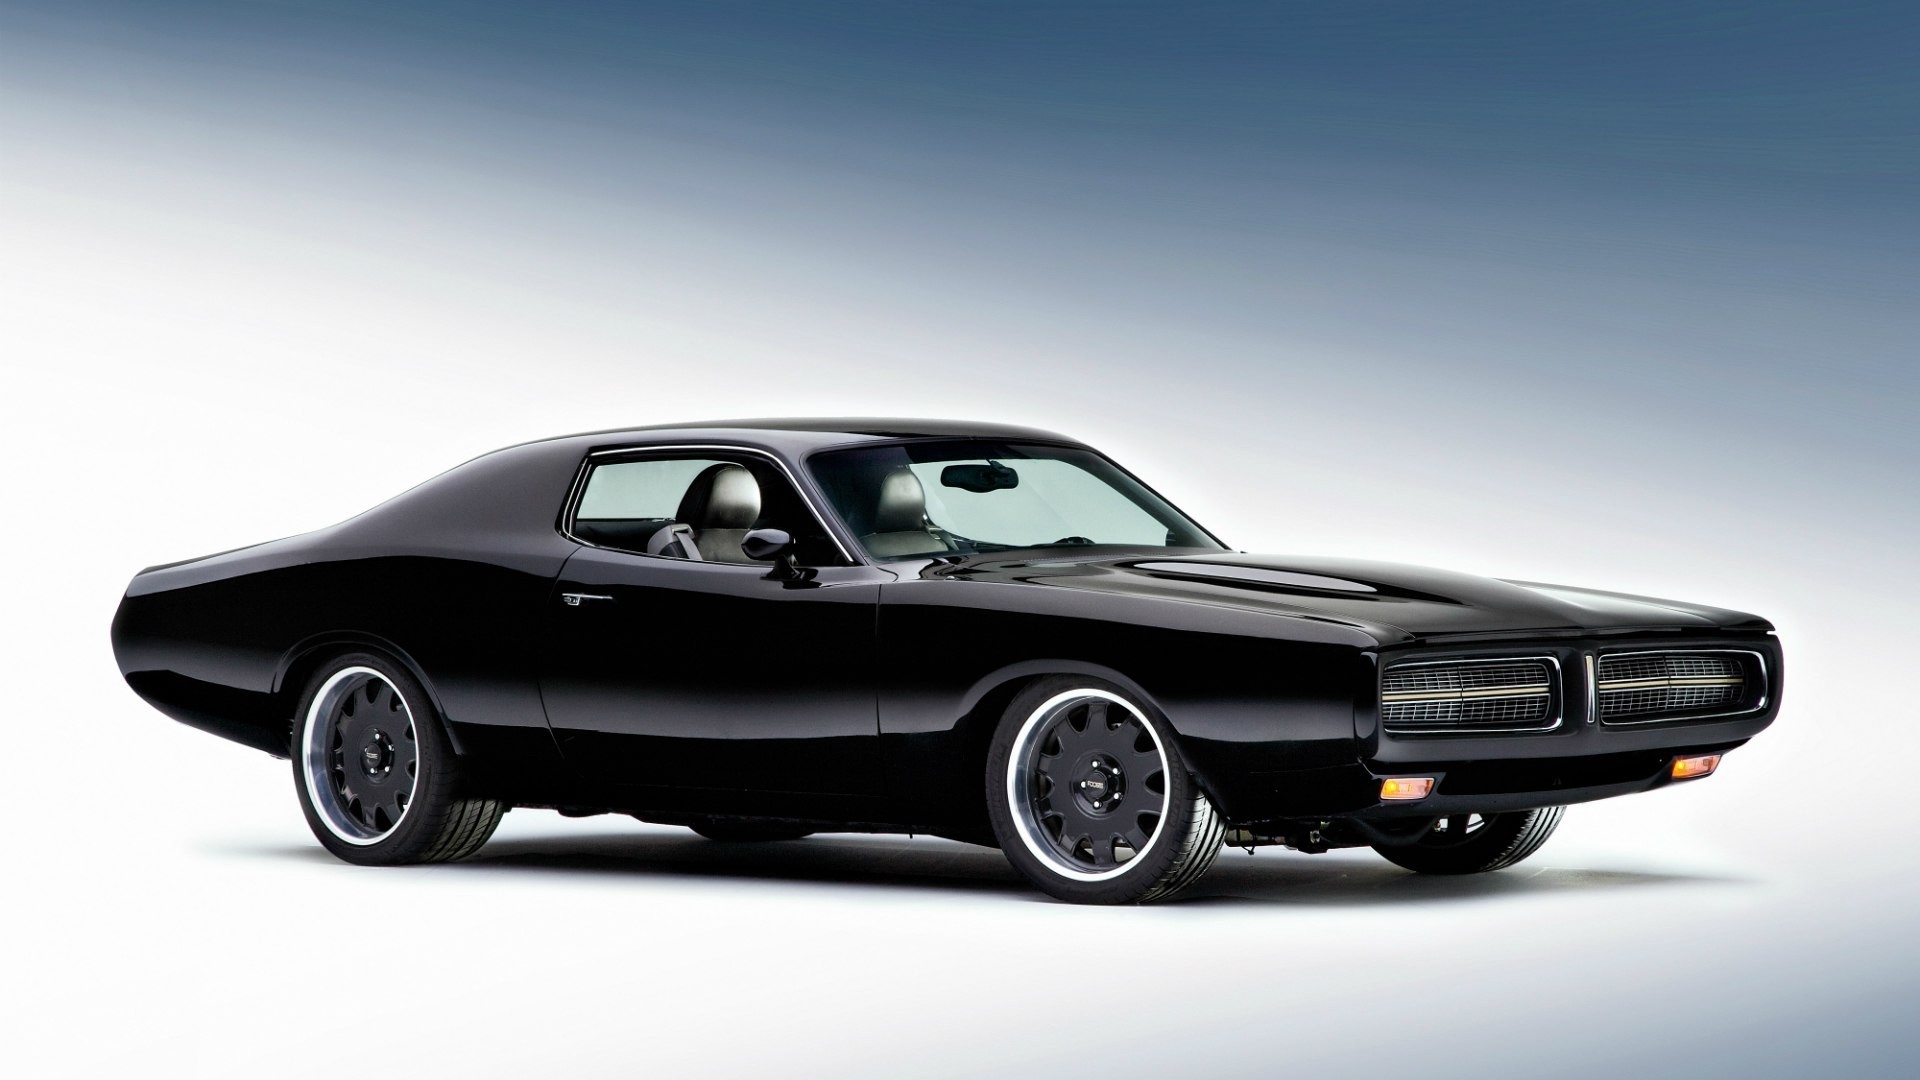 1920x1080 1970 Dodge Charger Cars, dodge charger phone wallpaper - JohnyWheels